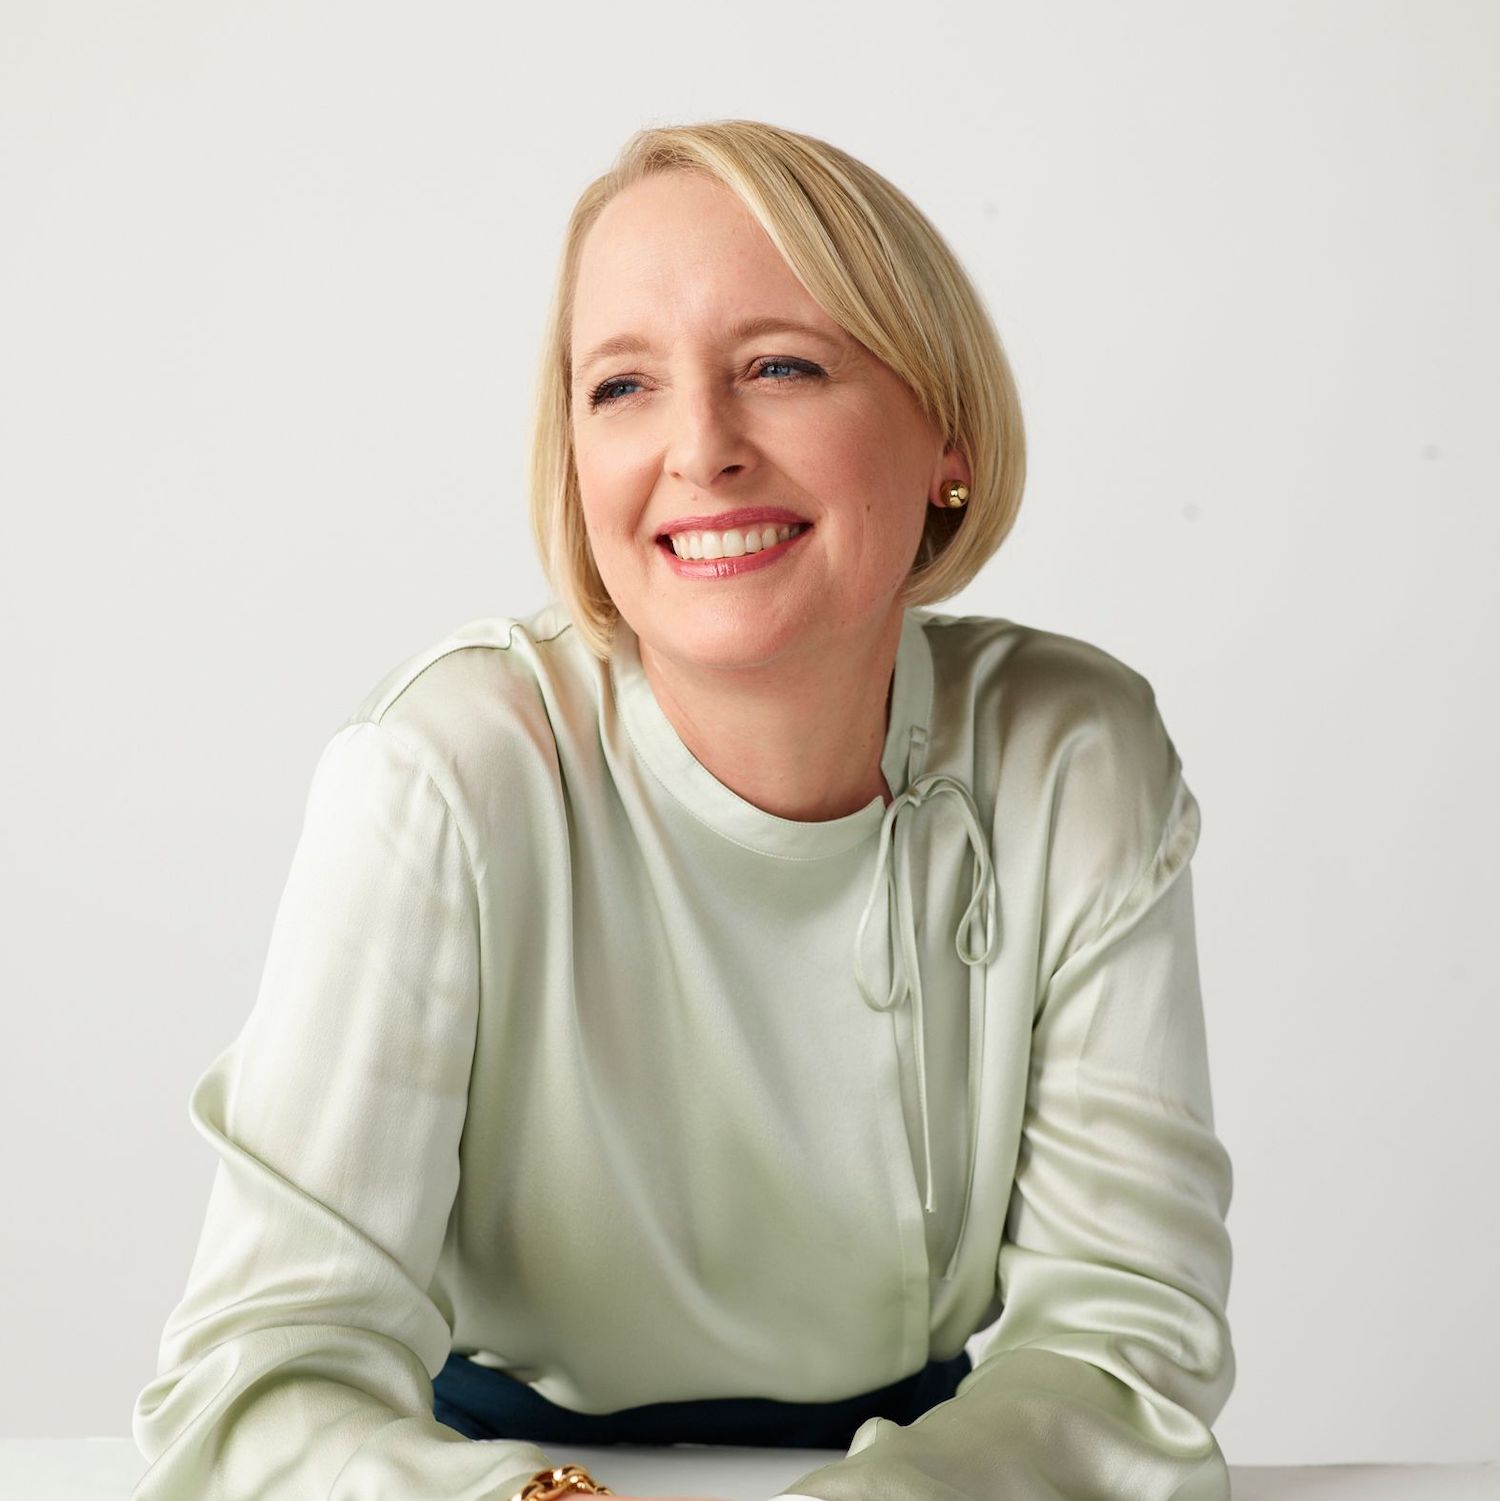 White woman with short blonde hair wears light grey silk top and smiles